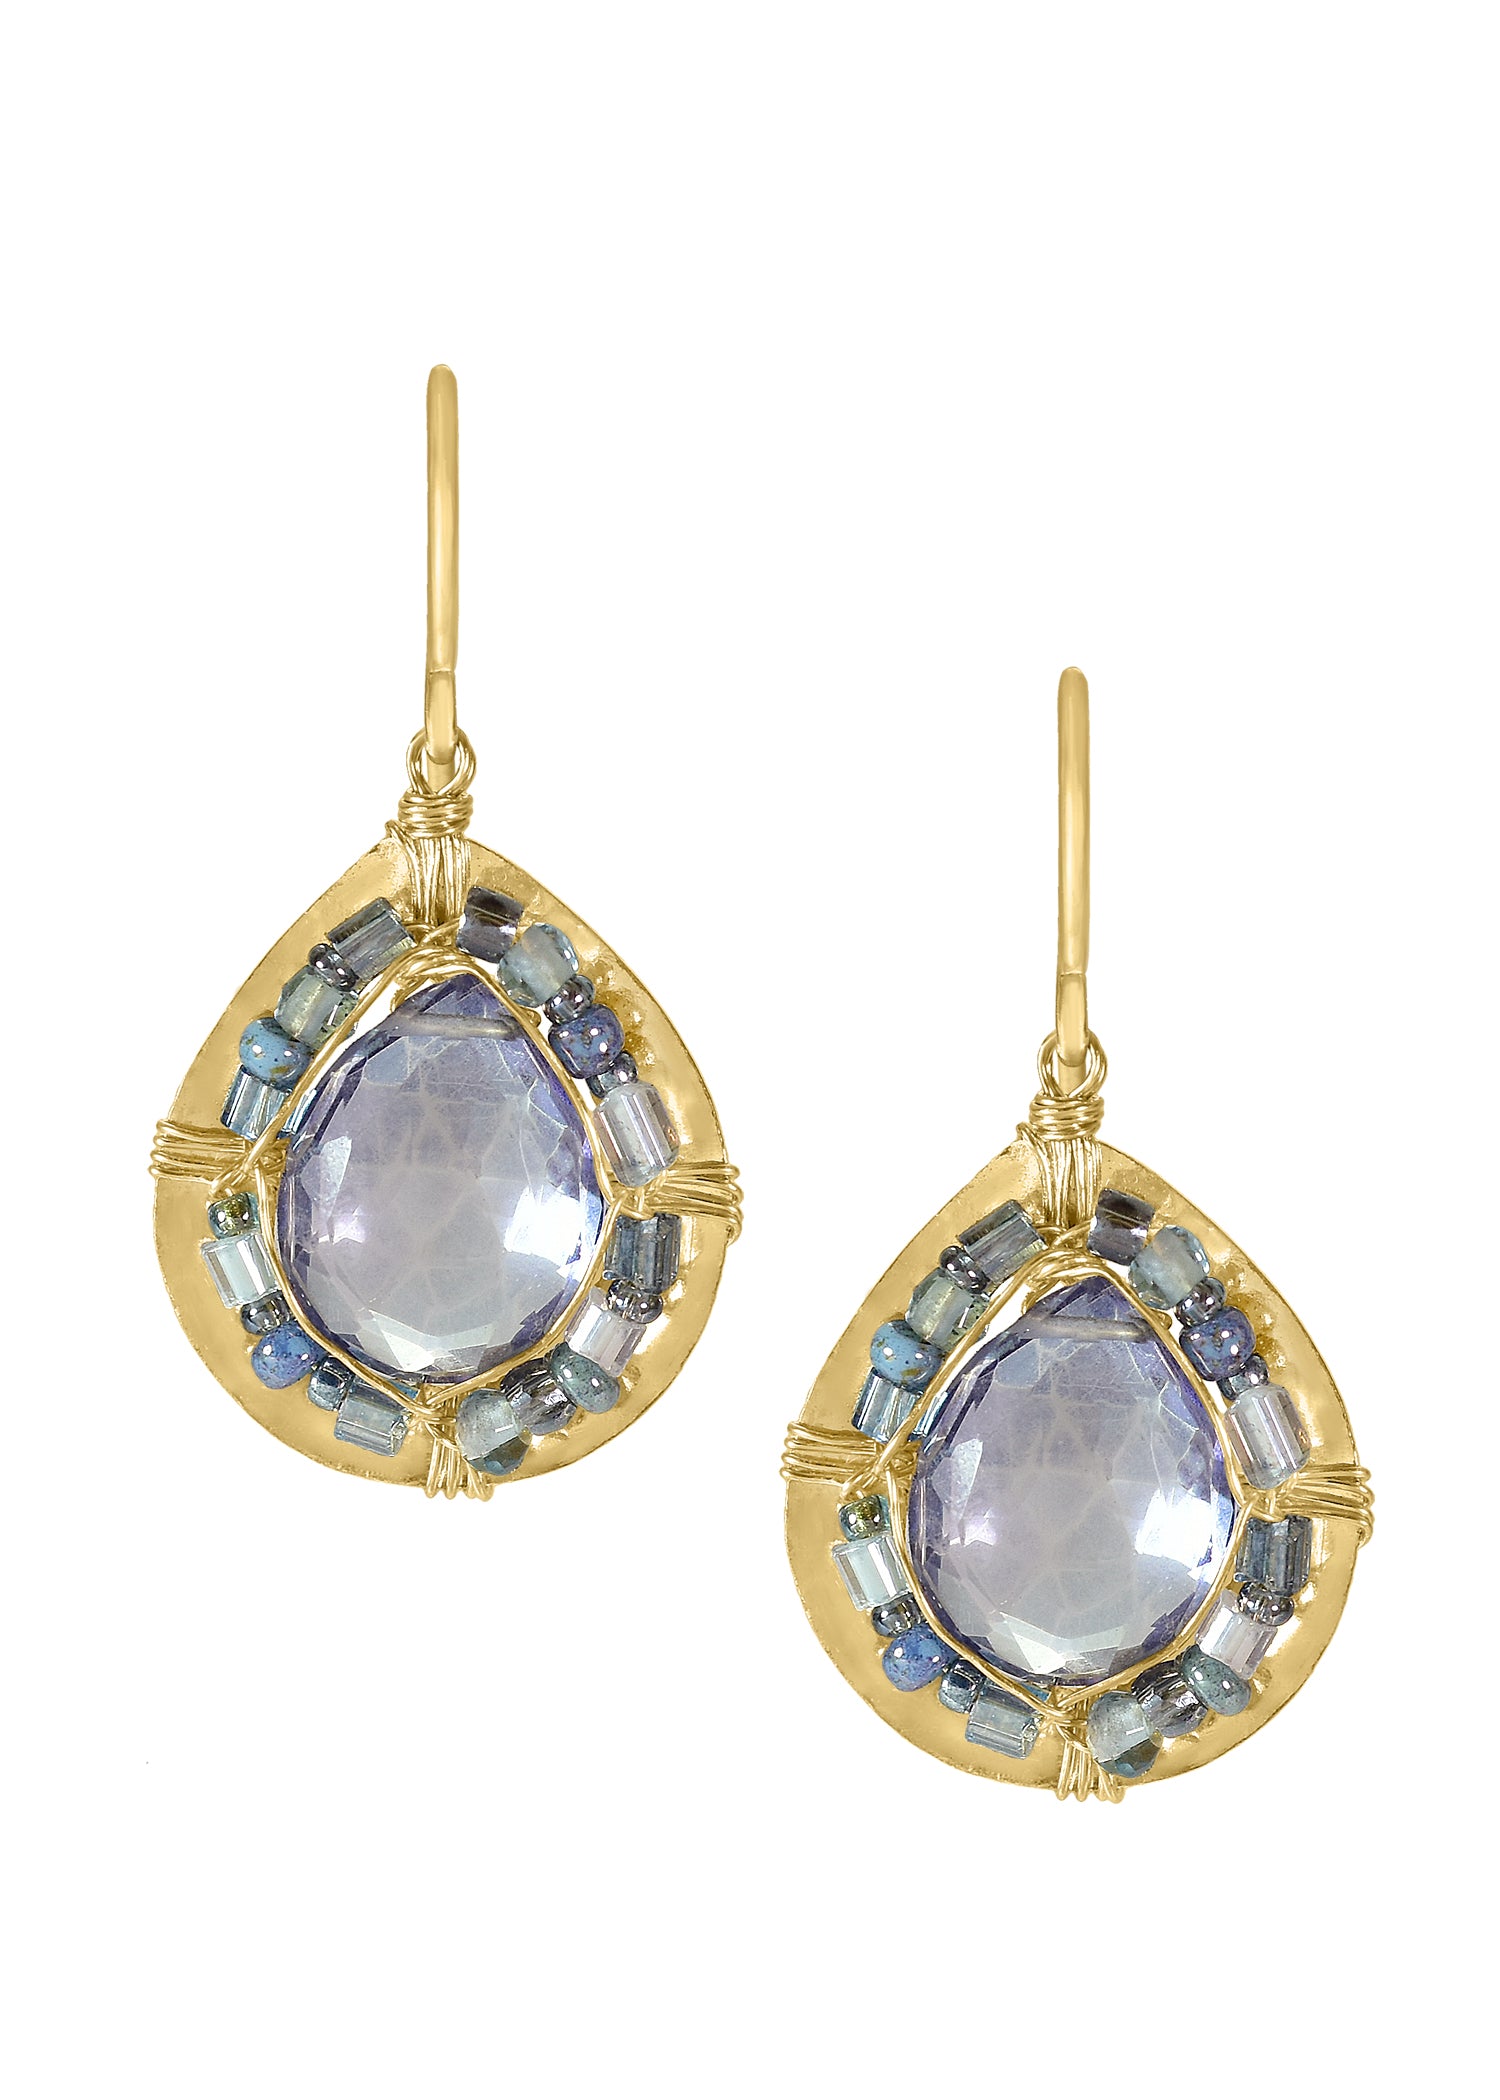 Blue quartz Seed beads 14k gold fill Earrings measure 1-3/16" in length (including the ear wires) and 11/16" in width at the widest point Handmade in our Los Angeles studio